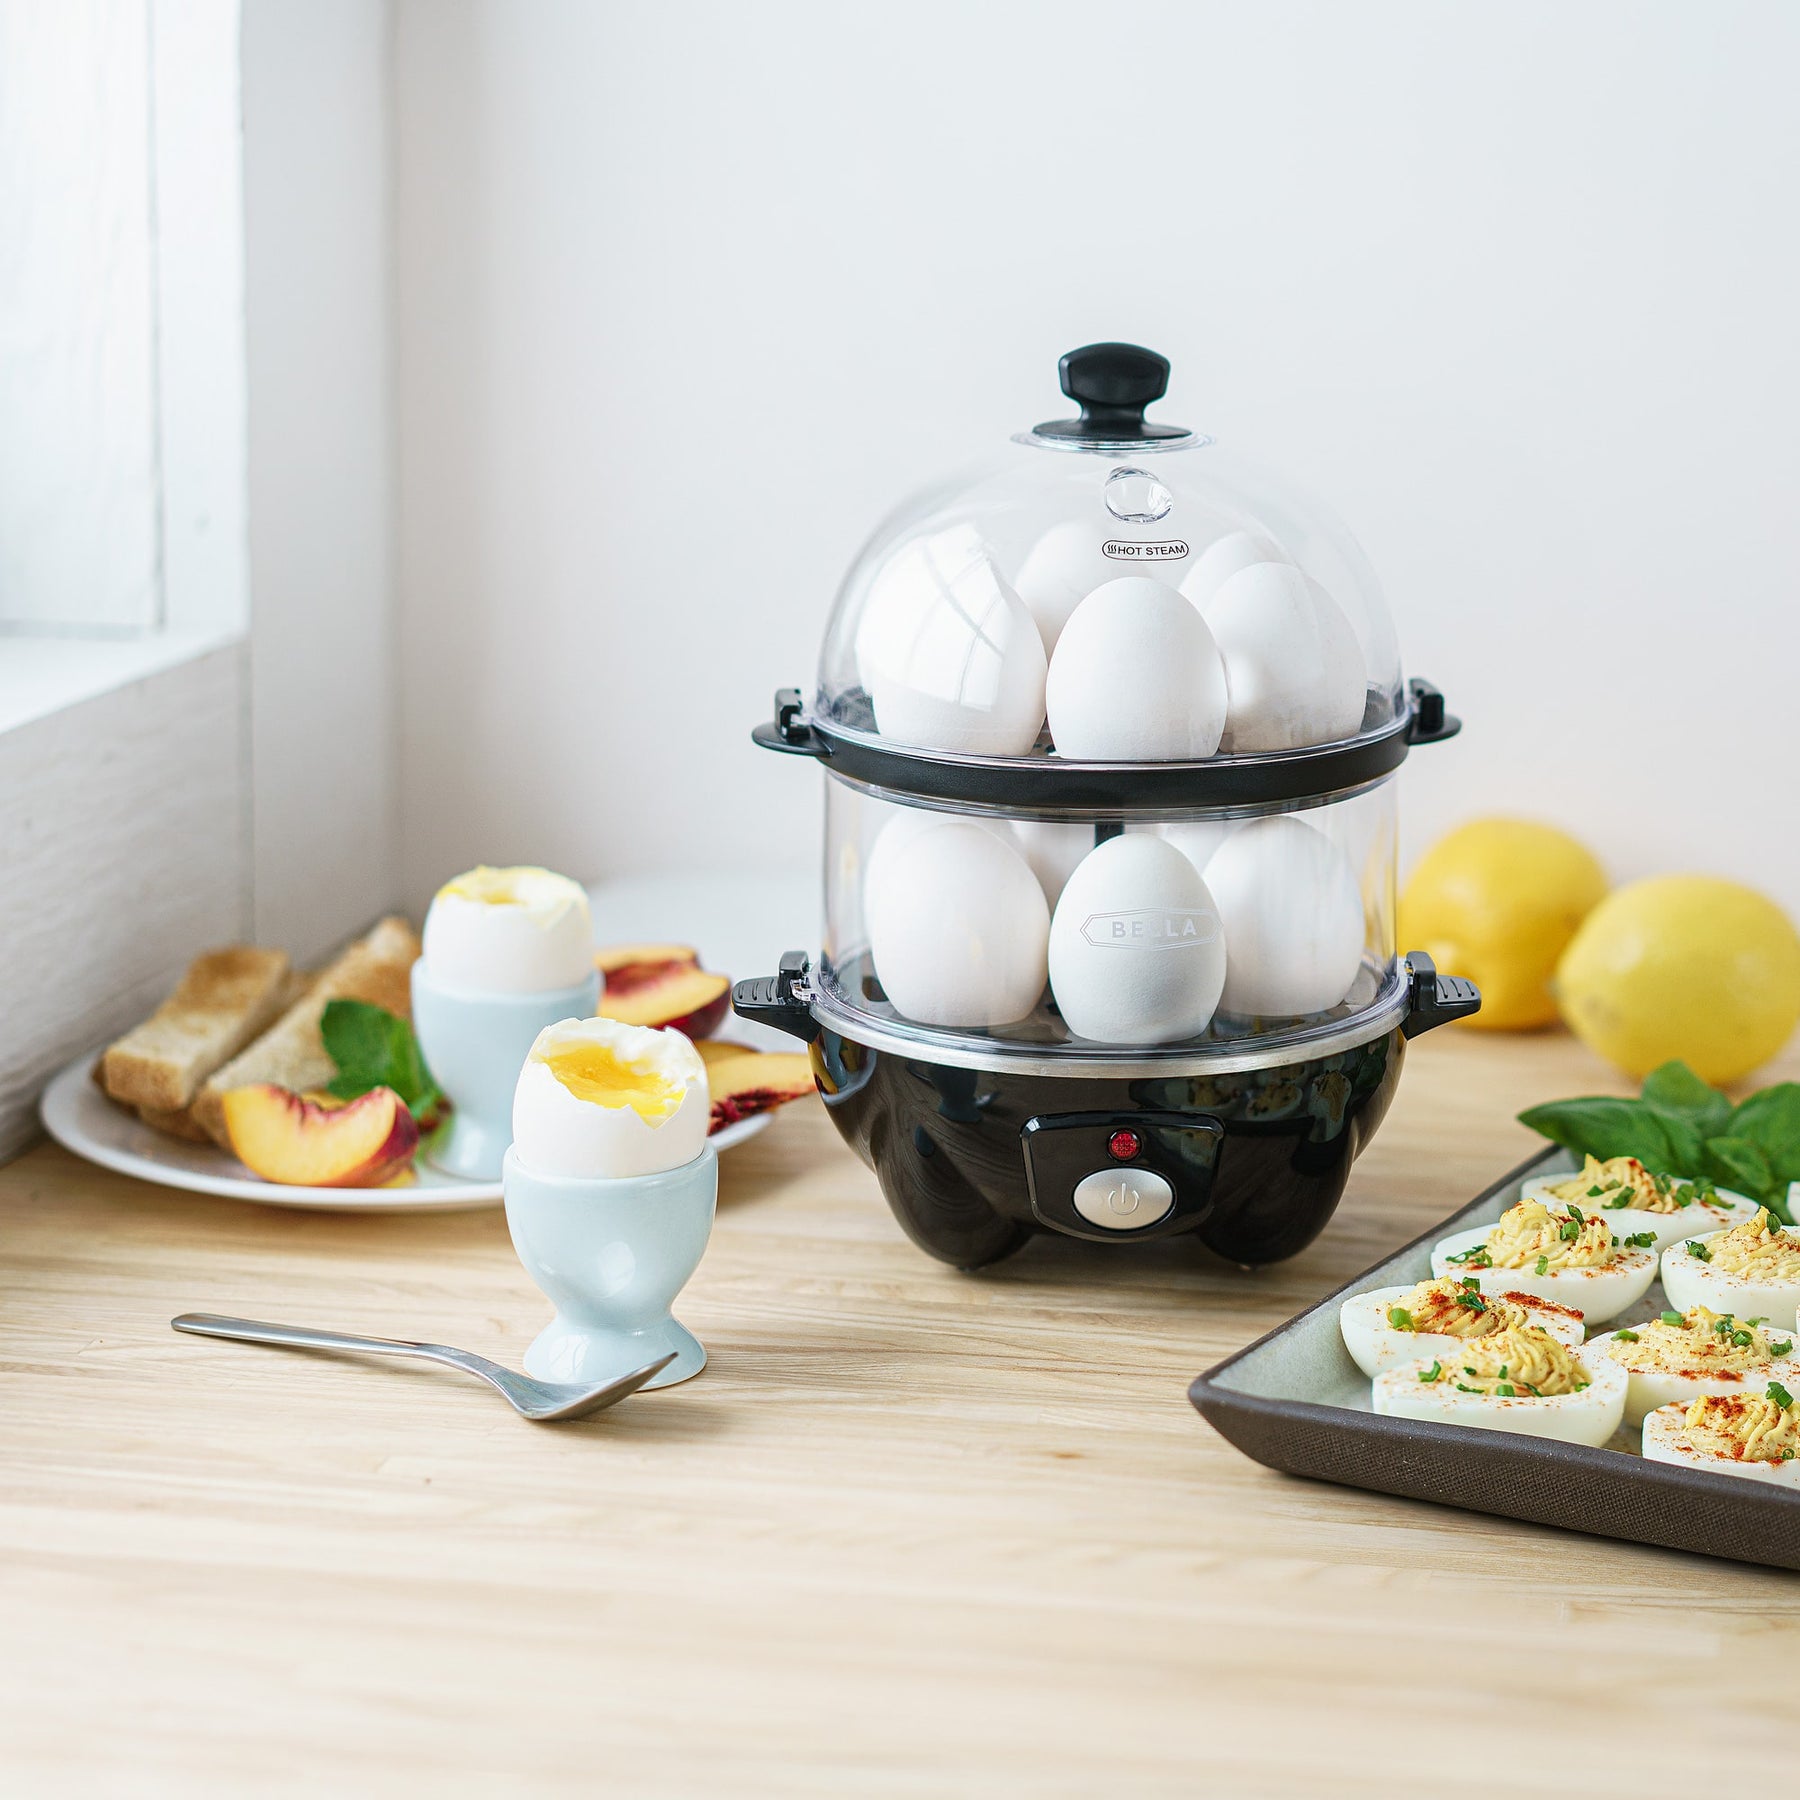 BELLA DOUBLE TIER EGG COOKER - SOFT, MEDIUM, OR HARD EGGS BOILED IN  MINUTES!